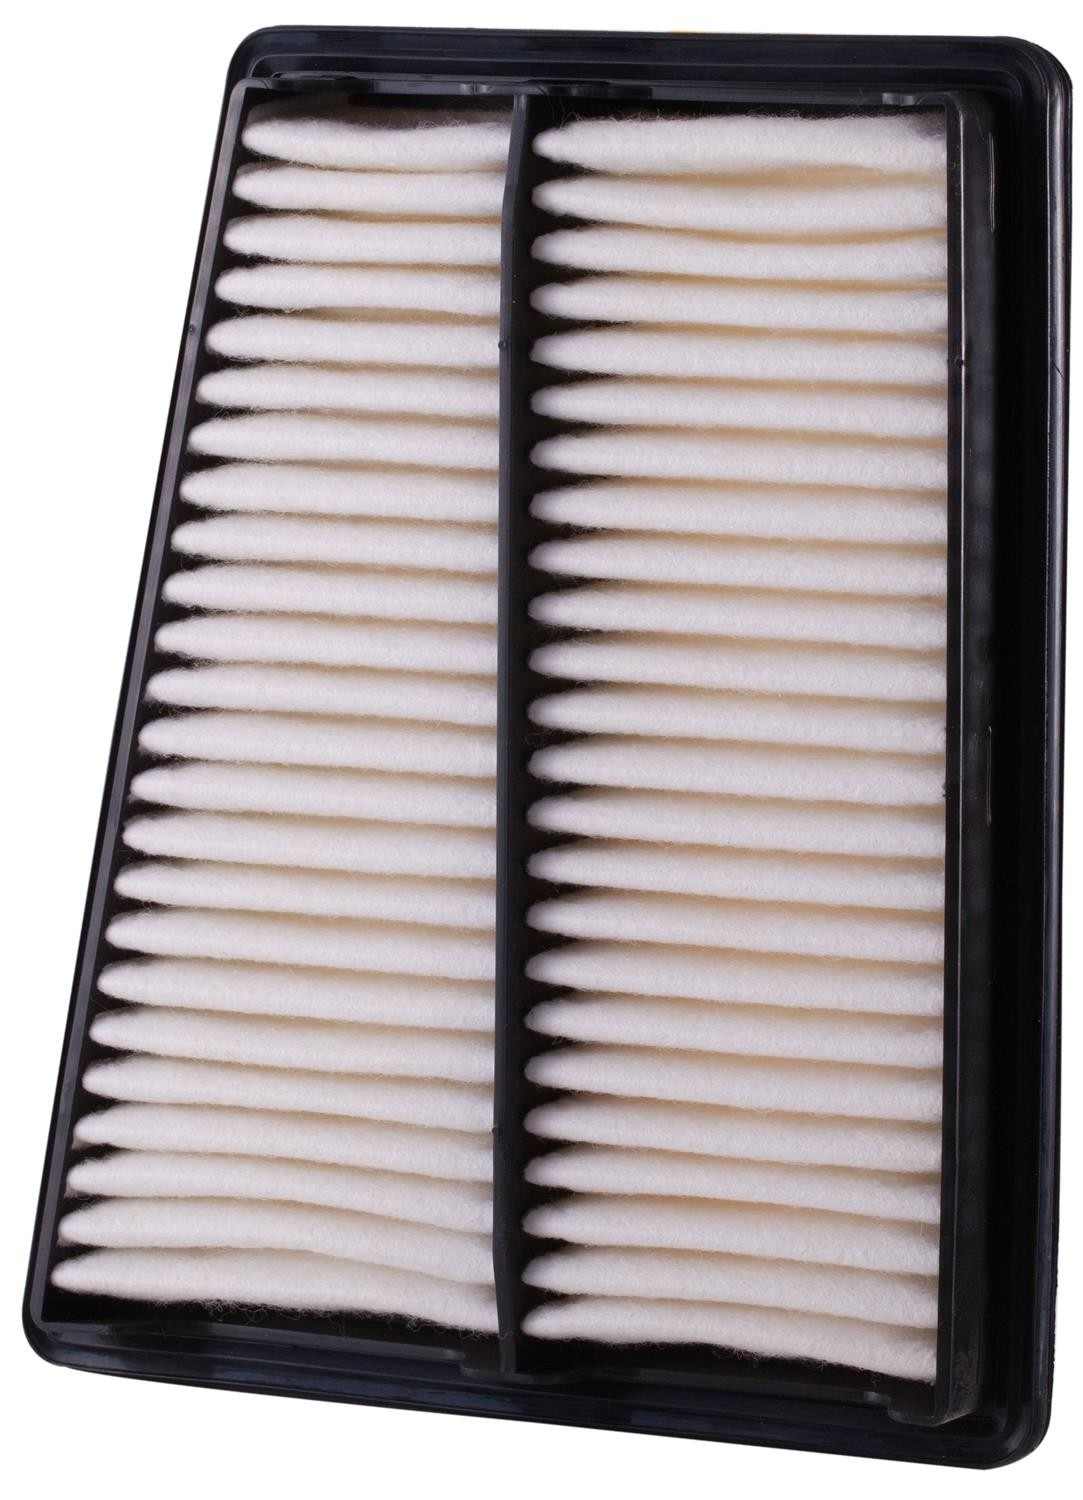 Back View of Air Filter PRONTO PA4808